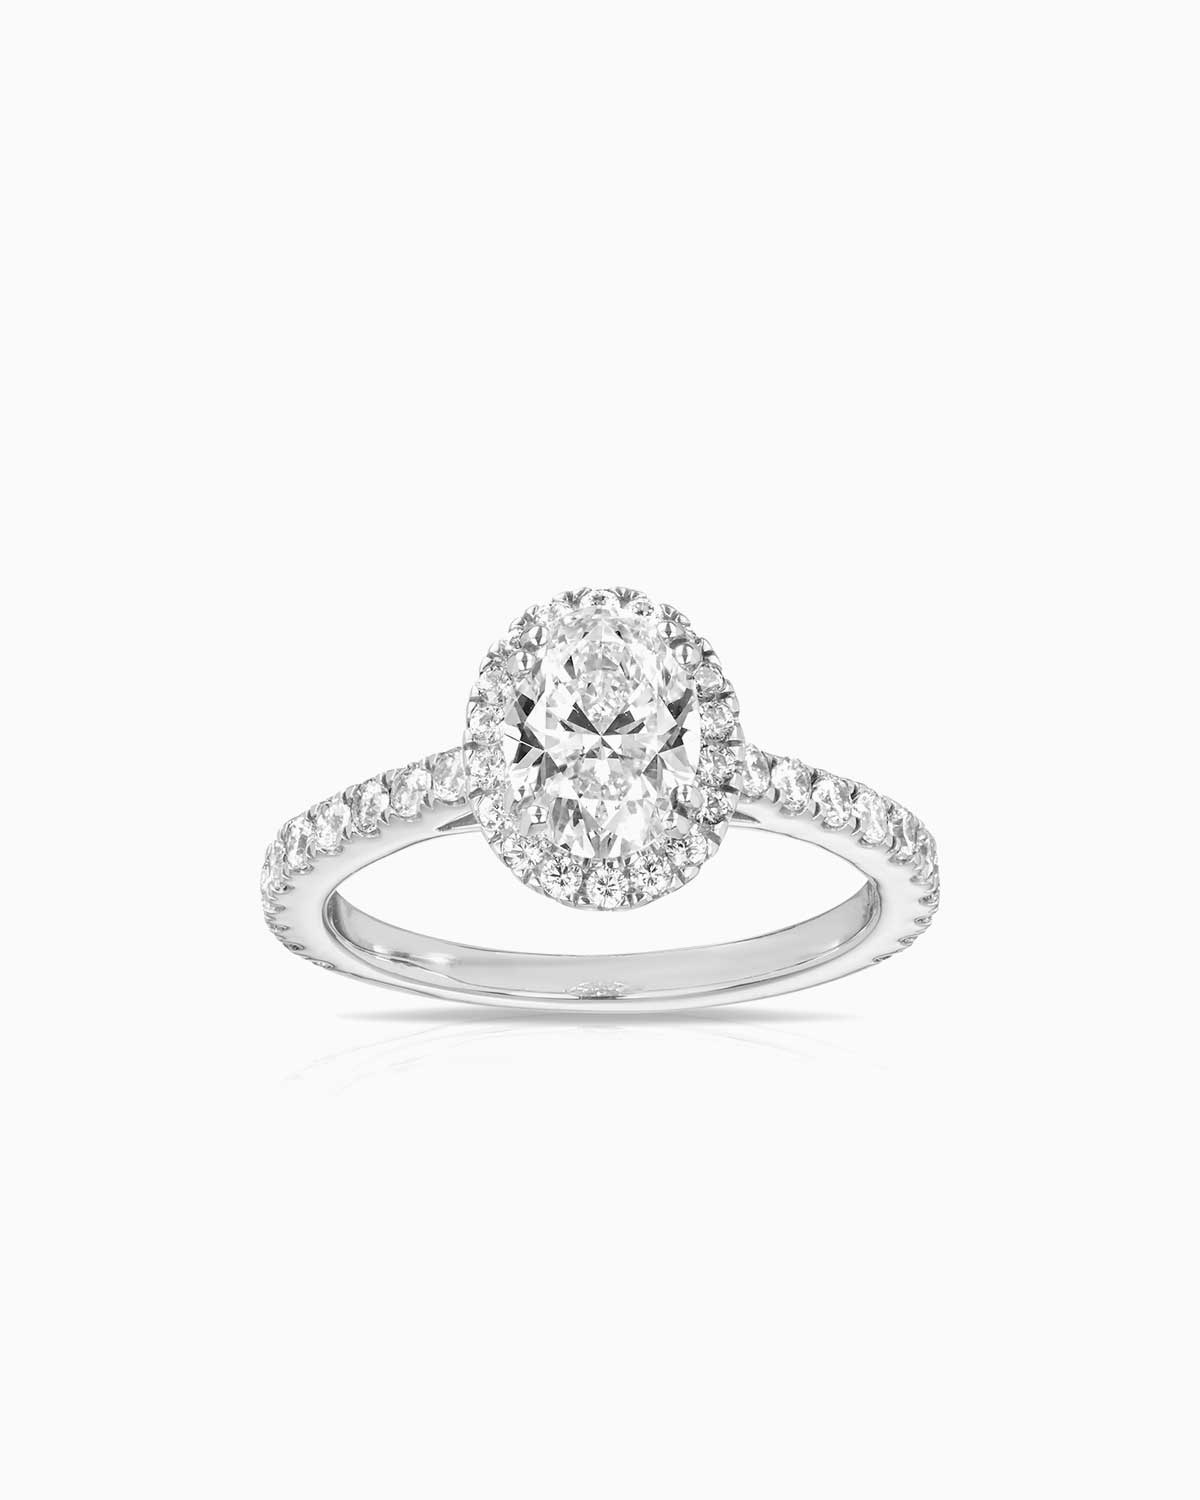 oval halo diamond engagement ring featuring shoulder diamonds and set in 18 karat white gold by claude and me jewellery